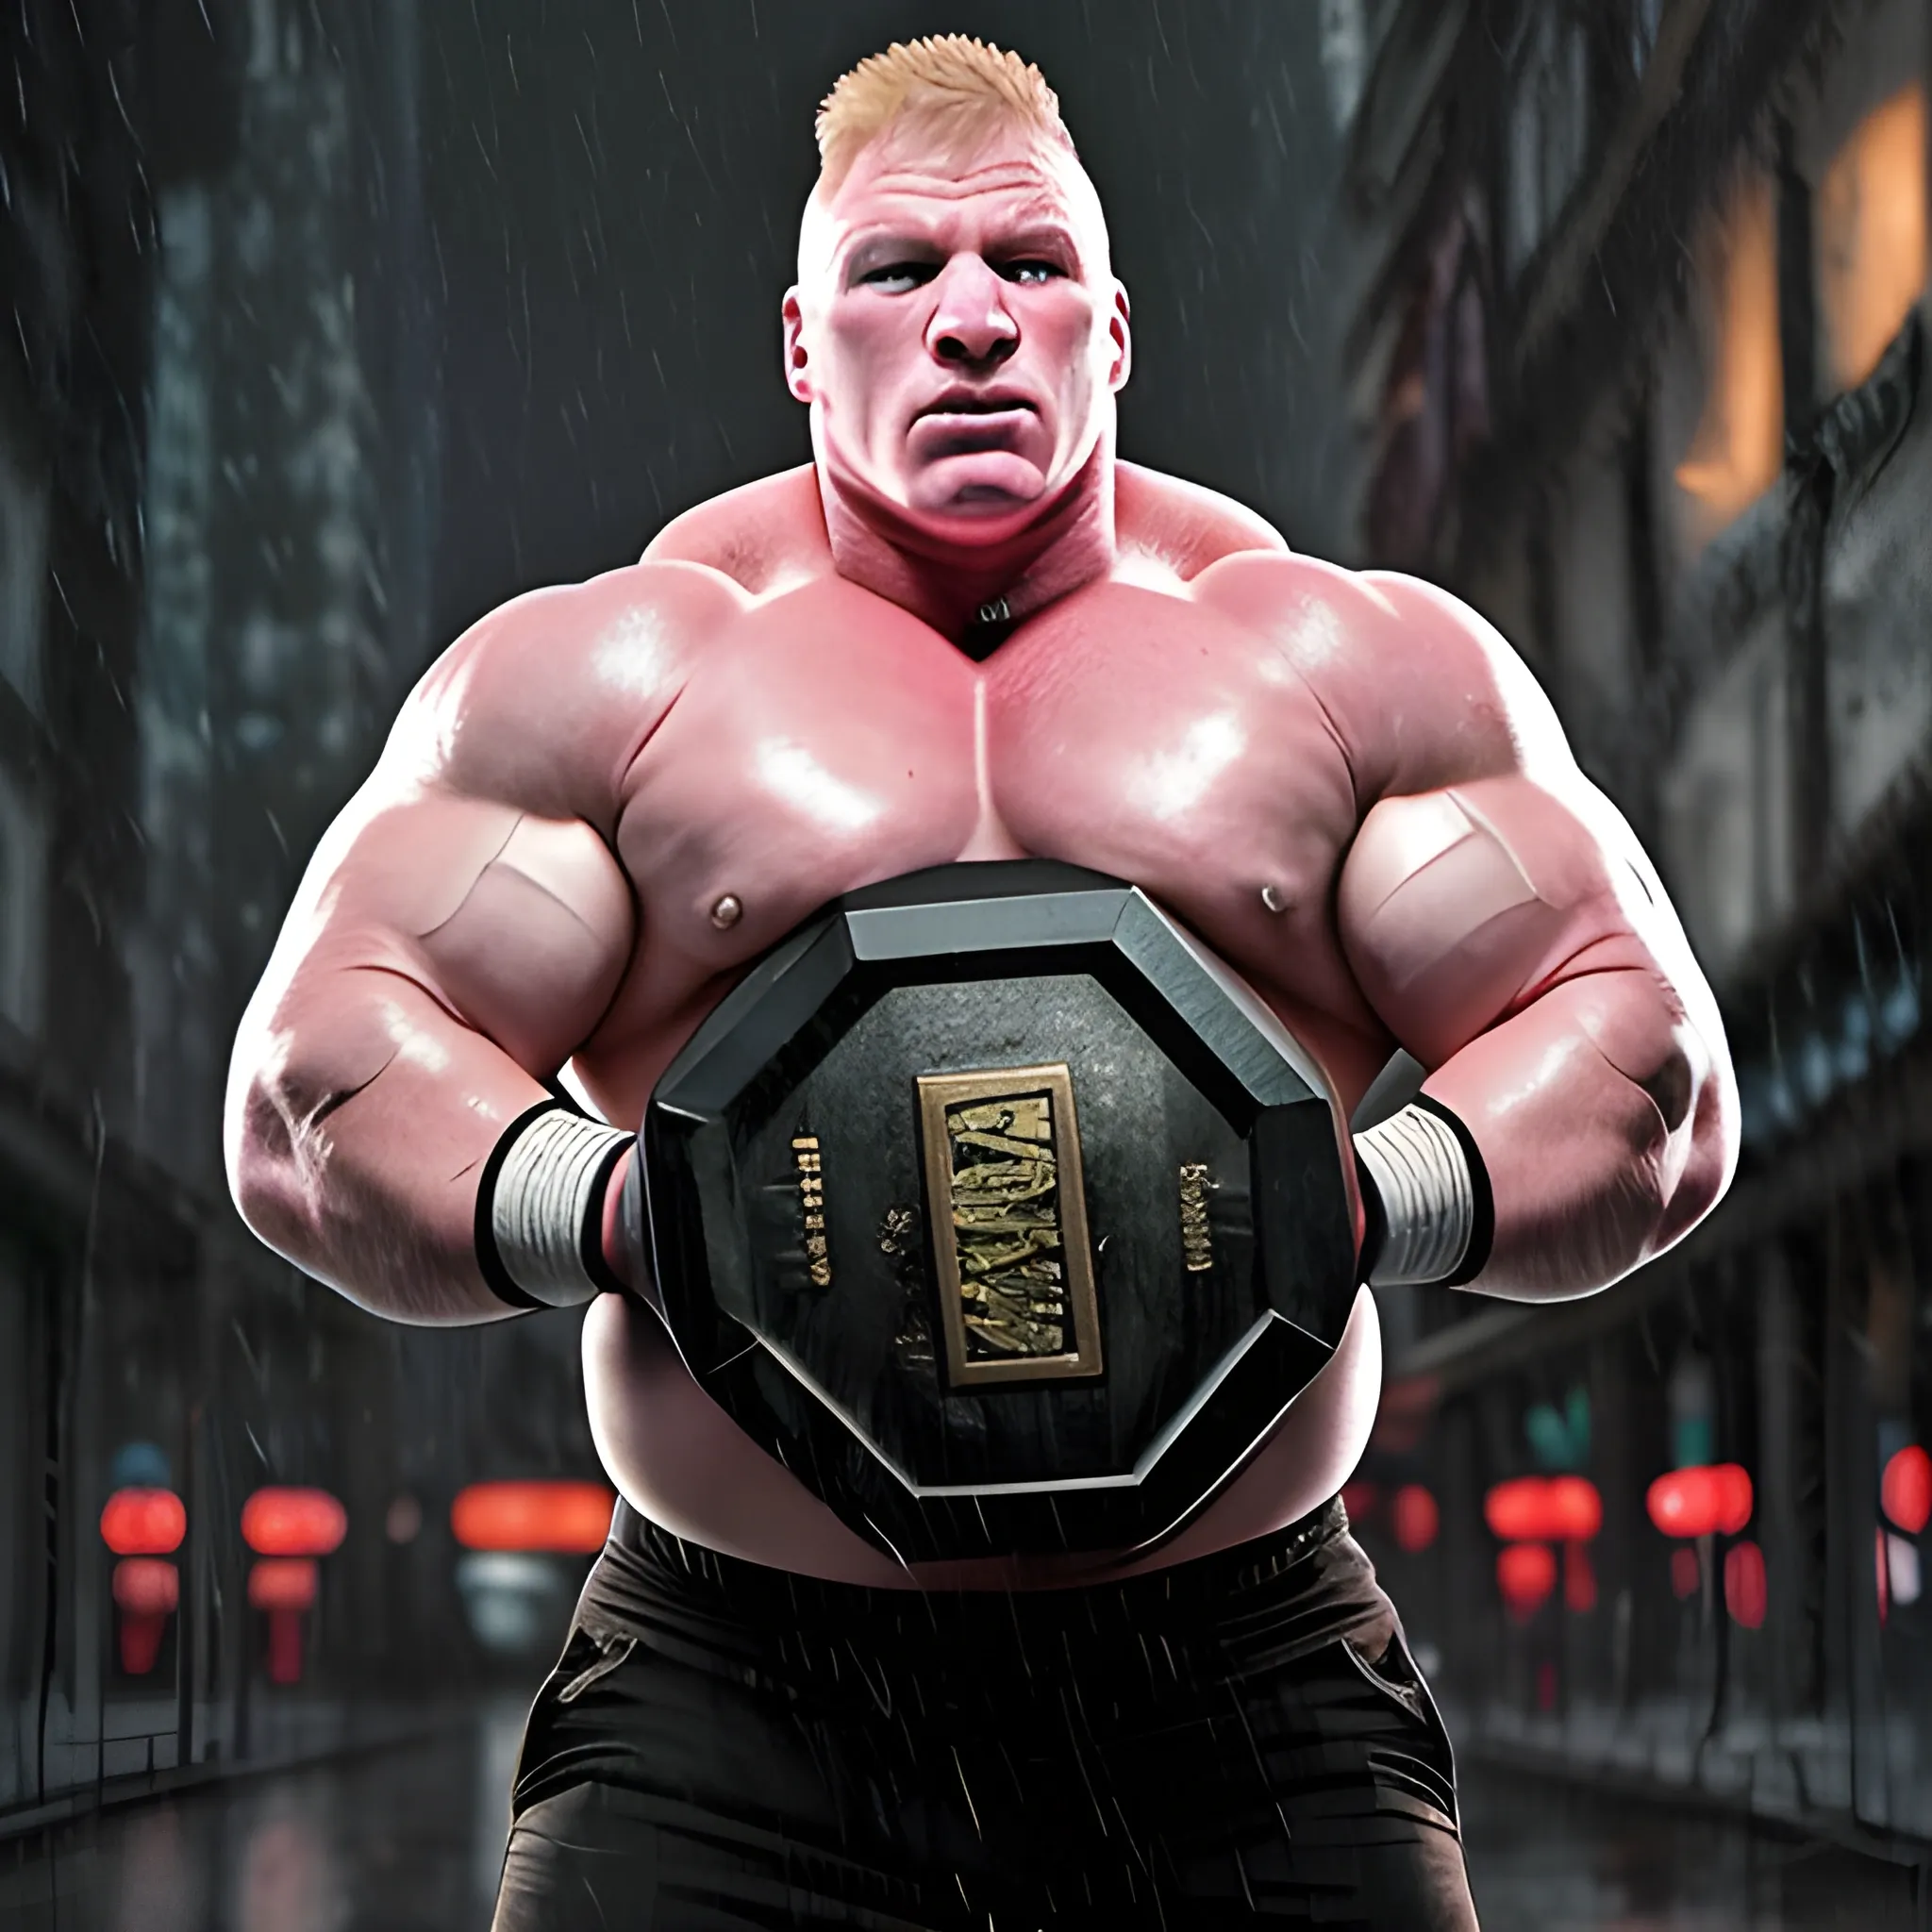 brock lesnar holds 1000 kg dumble in his one hand with his viens pumped in dark night in rain in city and his hand is fully blooded 
3D